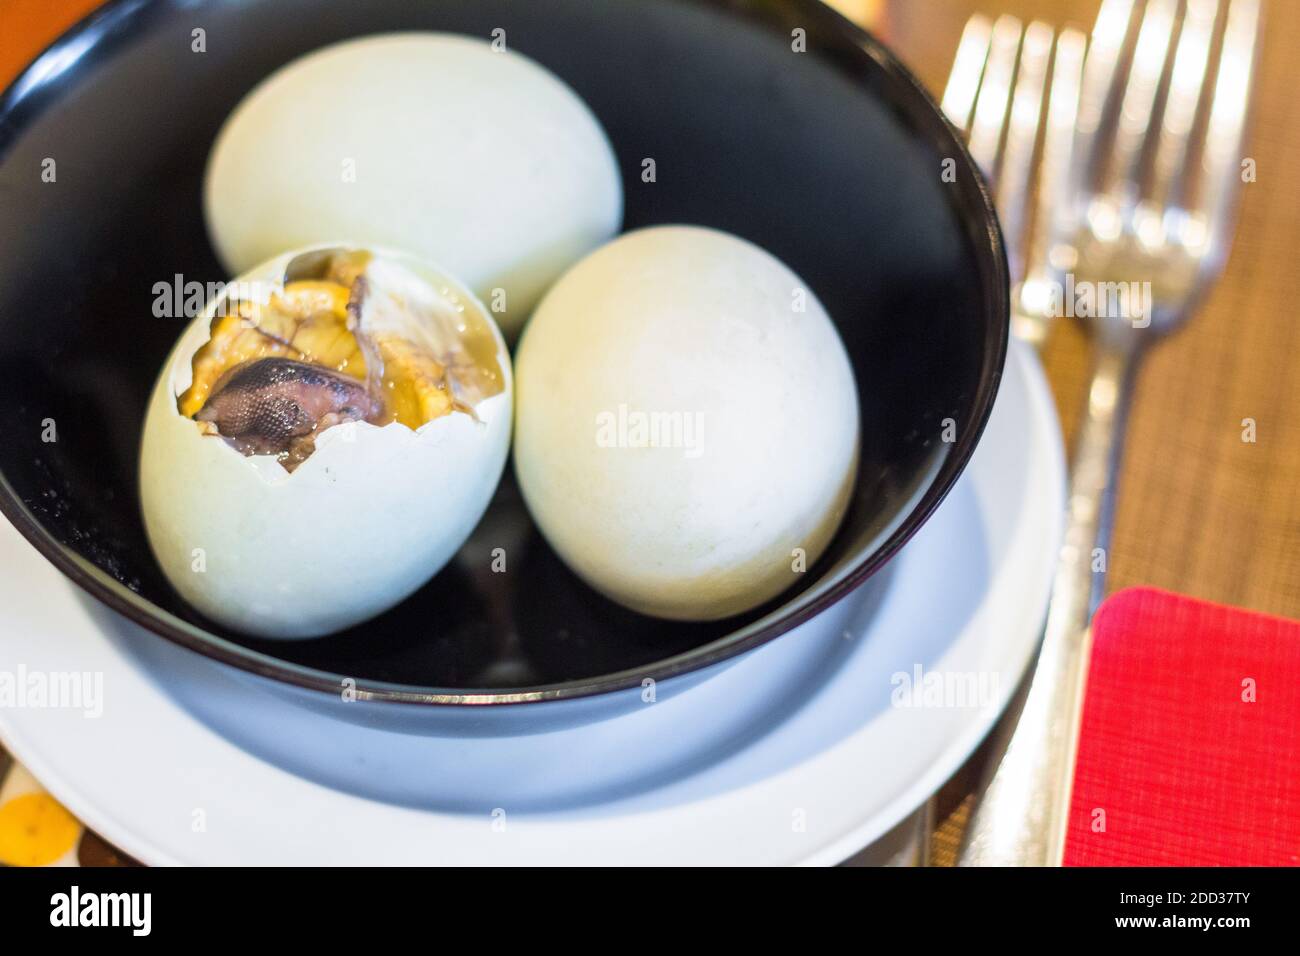 Duck egg embryo or balut, a popular Filipino food from the Philippines served at the Marco Polo Hotel Stock Photo